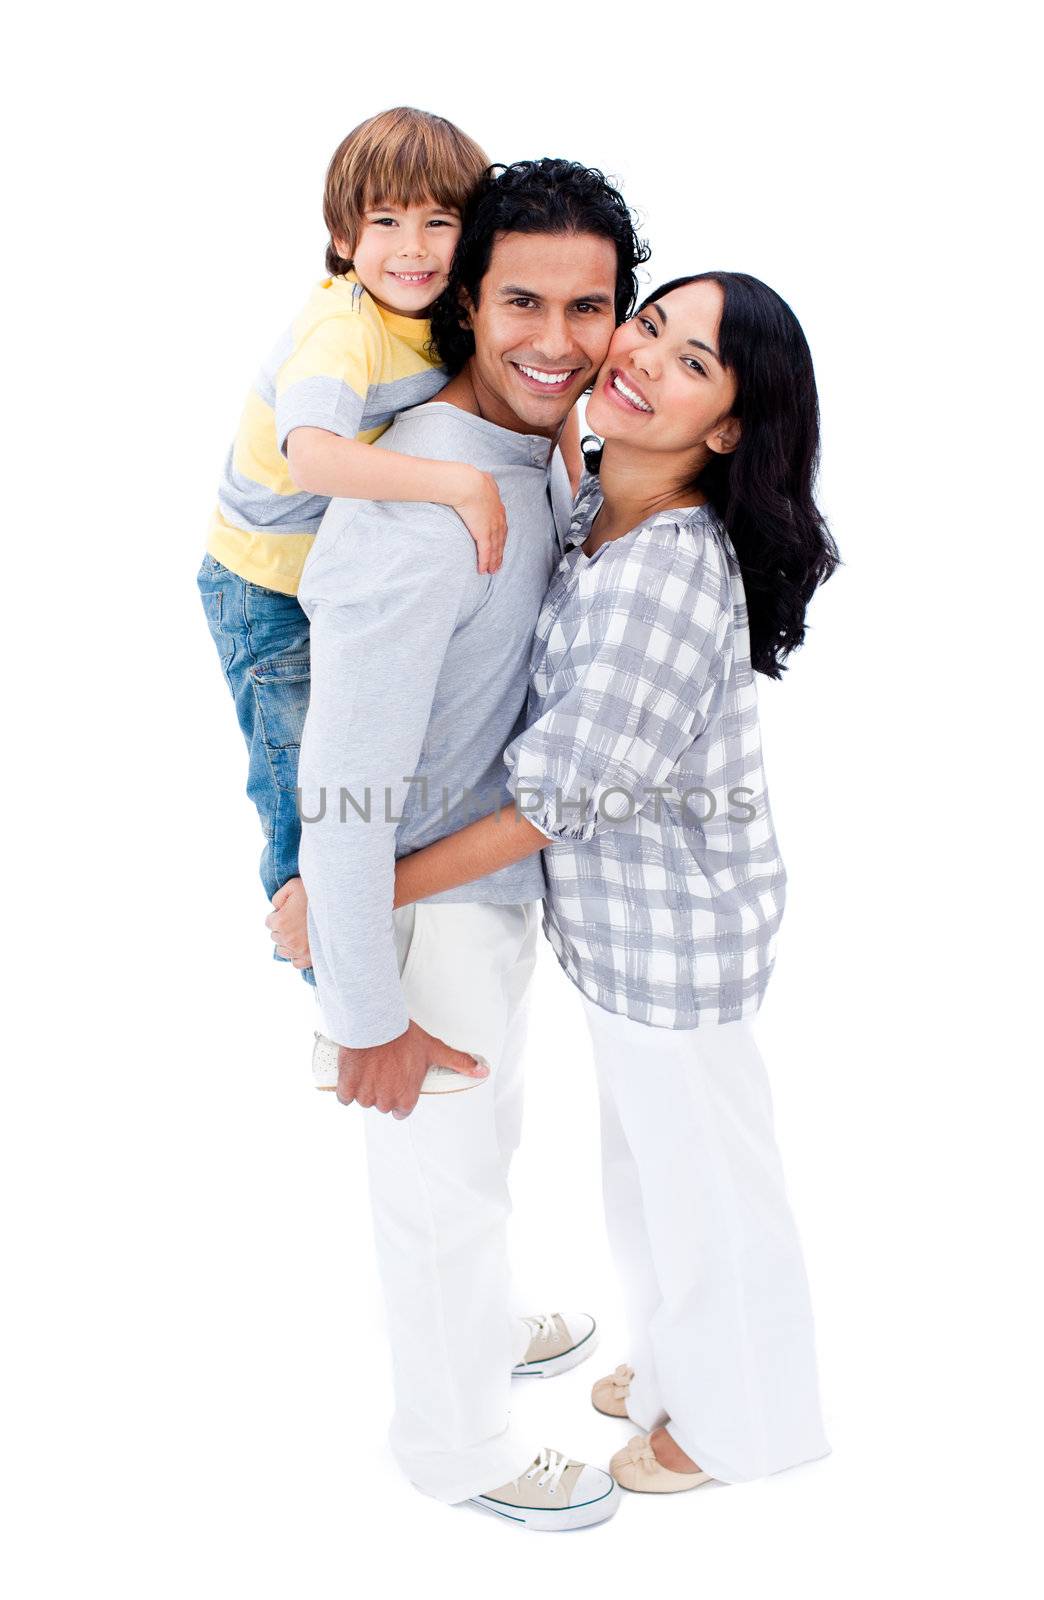 Joyful family hugging each other against a white background